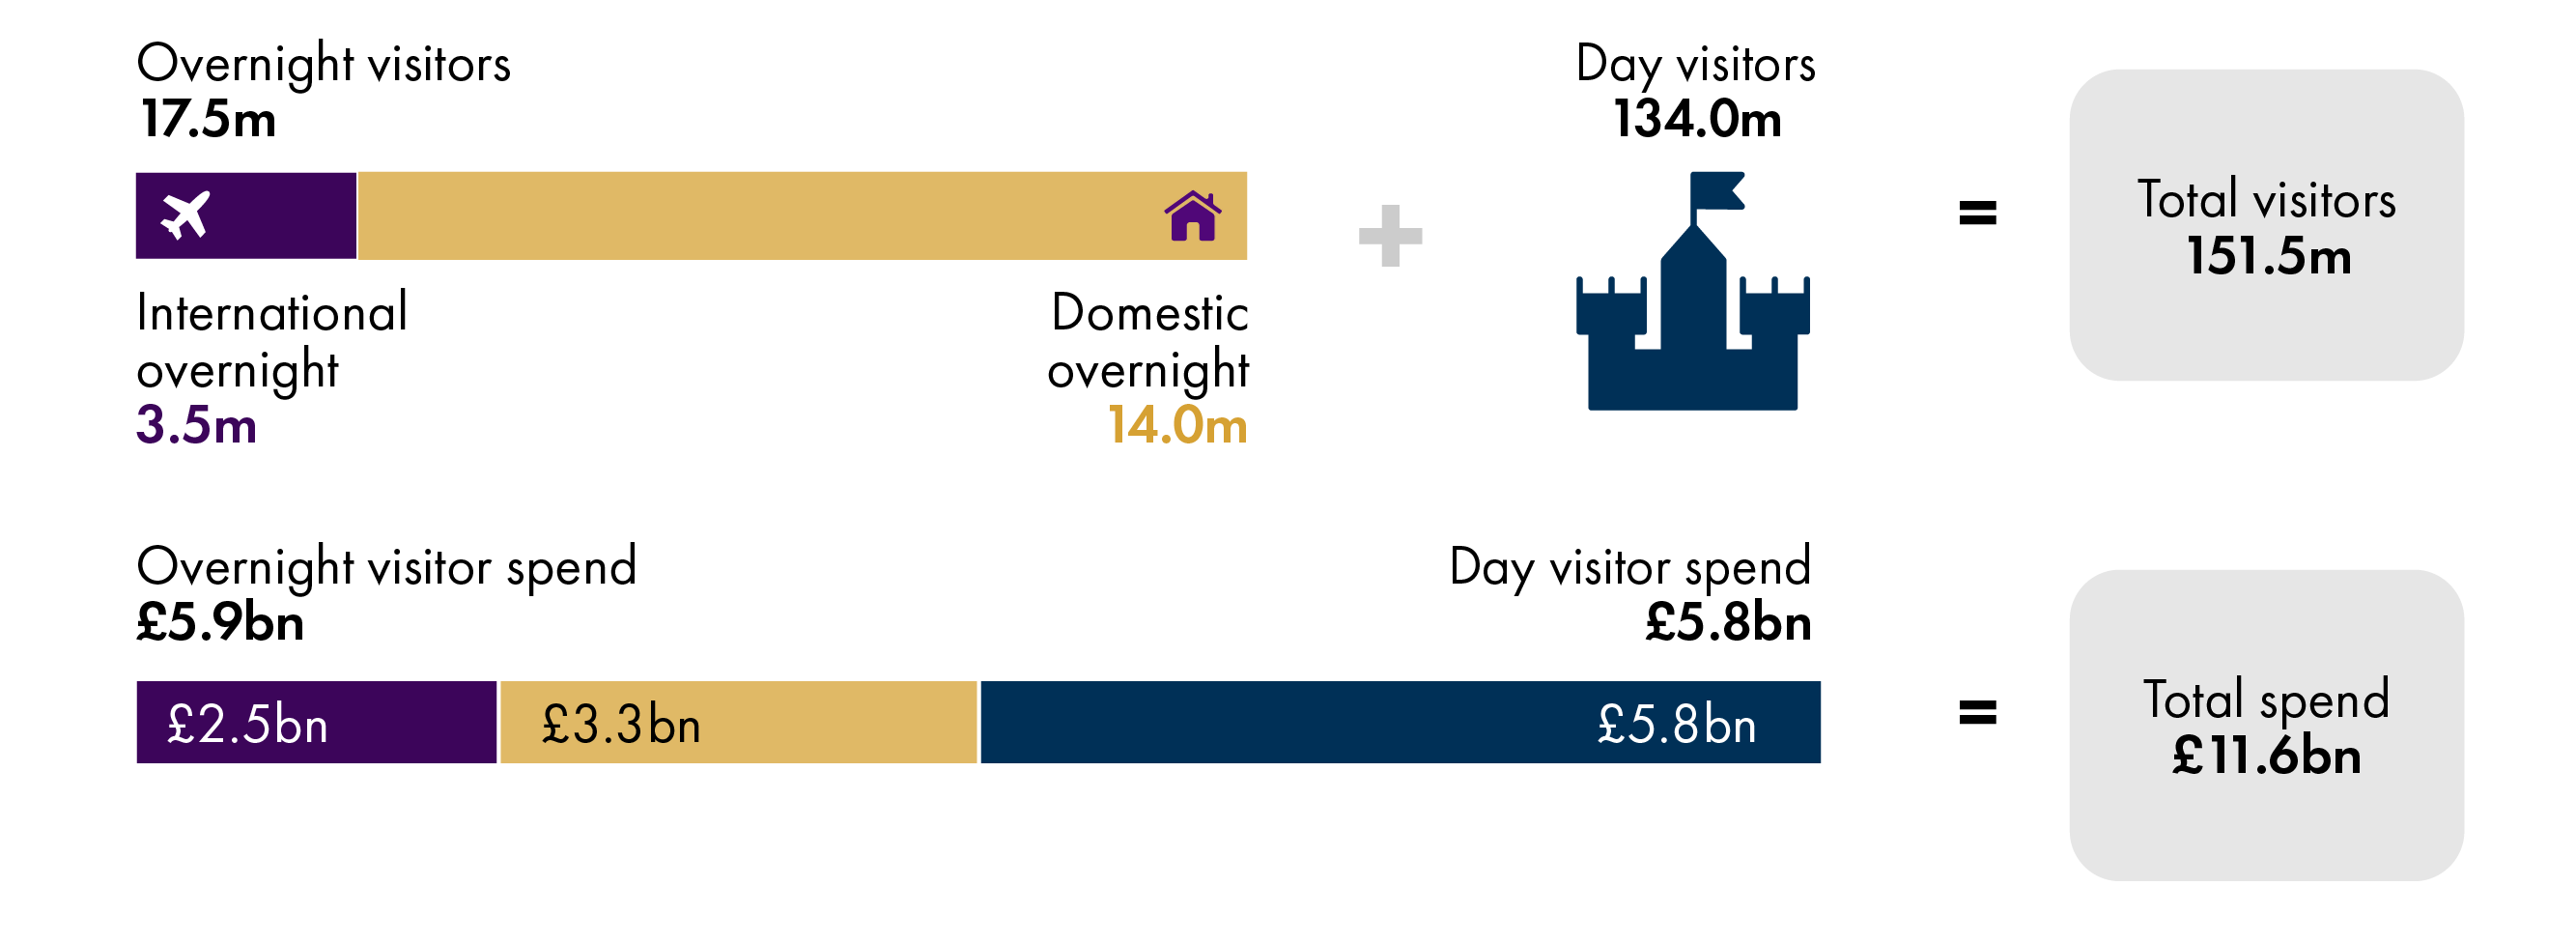 Scotland attracts around 17.5 million overnight visitors and 134 million day visitors annually, generating £11.6 billion in visitor expenditure.